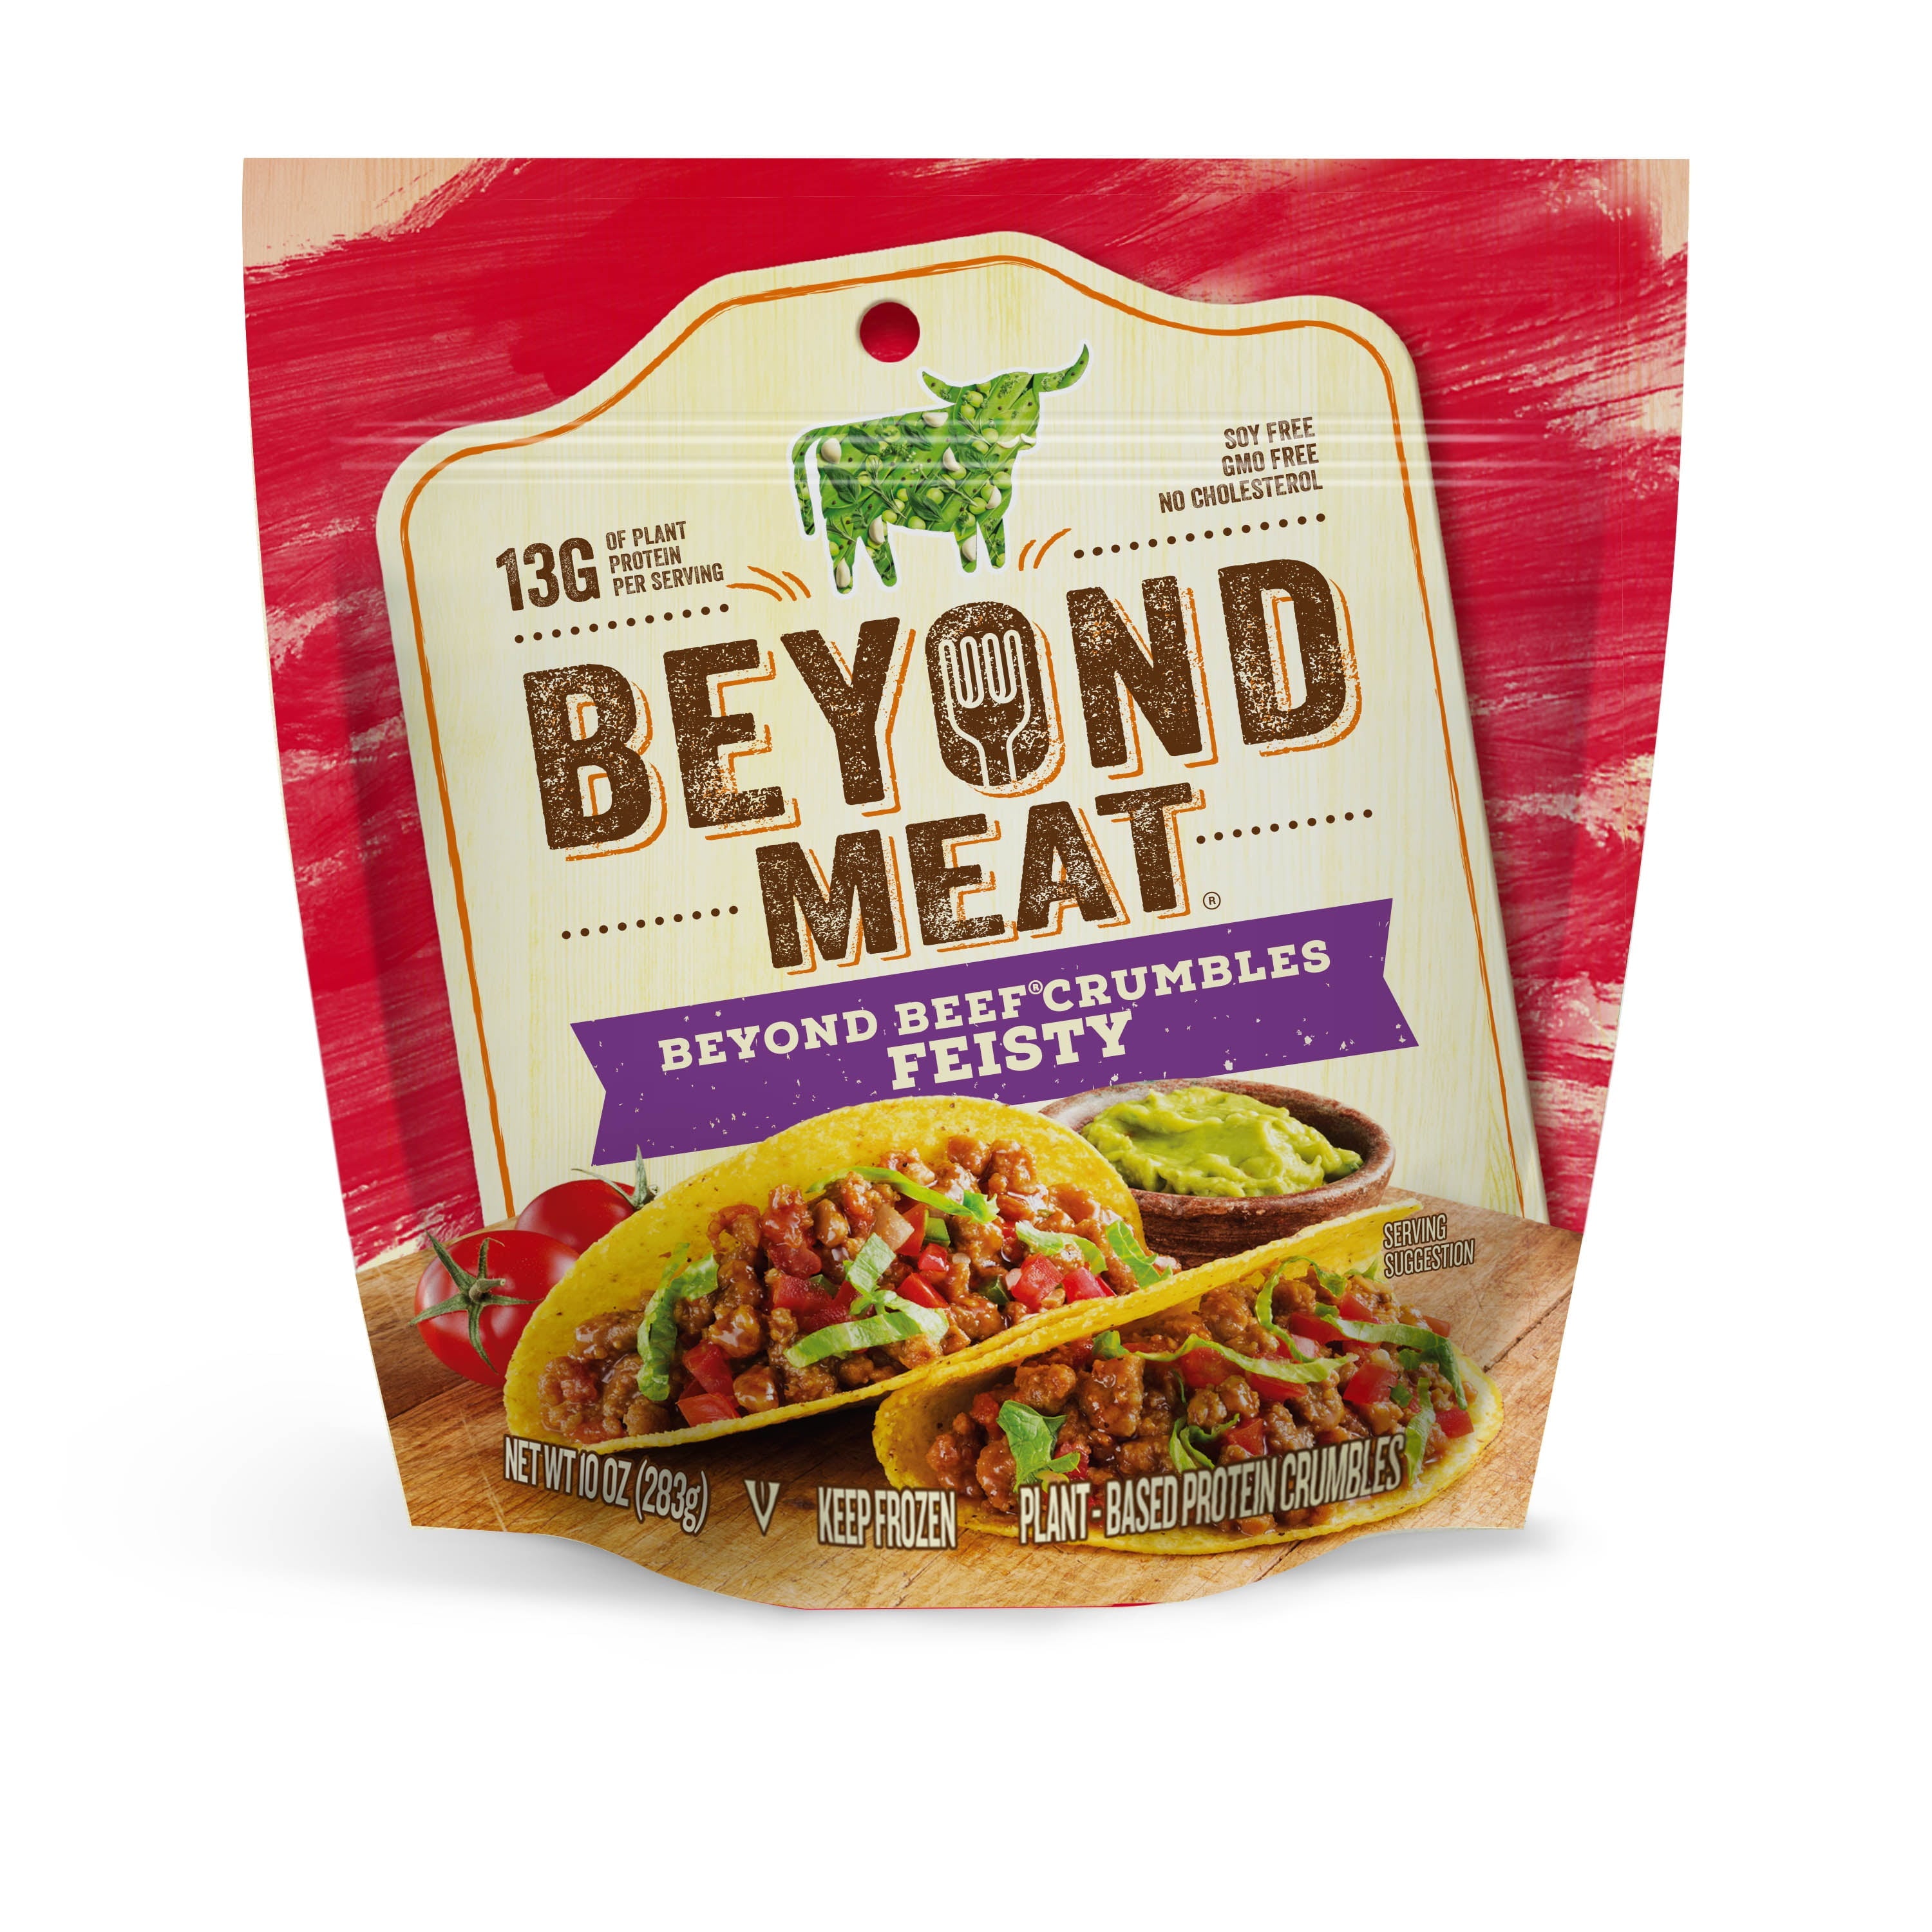 Beyond Meat Feisty Meatless Beef Crumbles 10 oz Bag